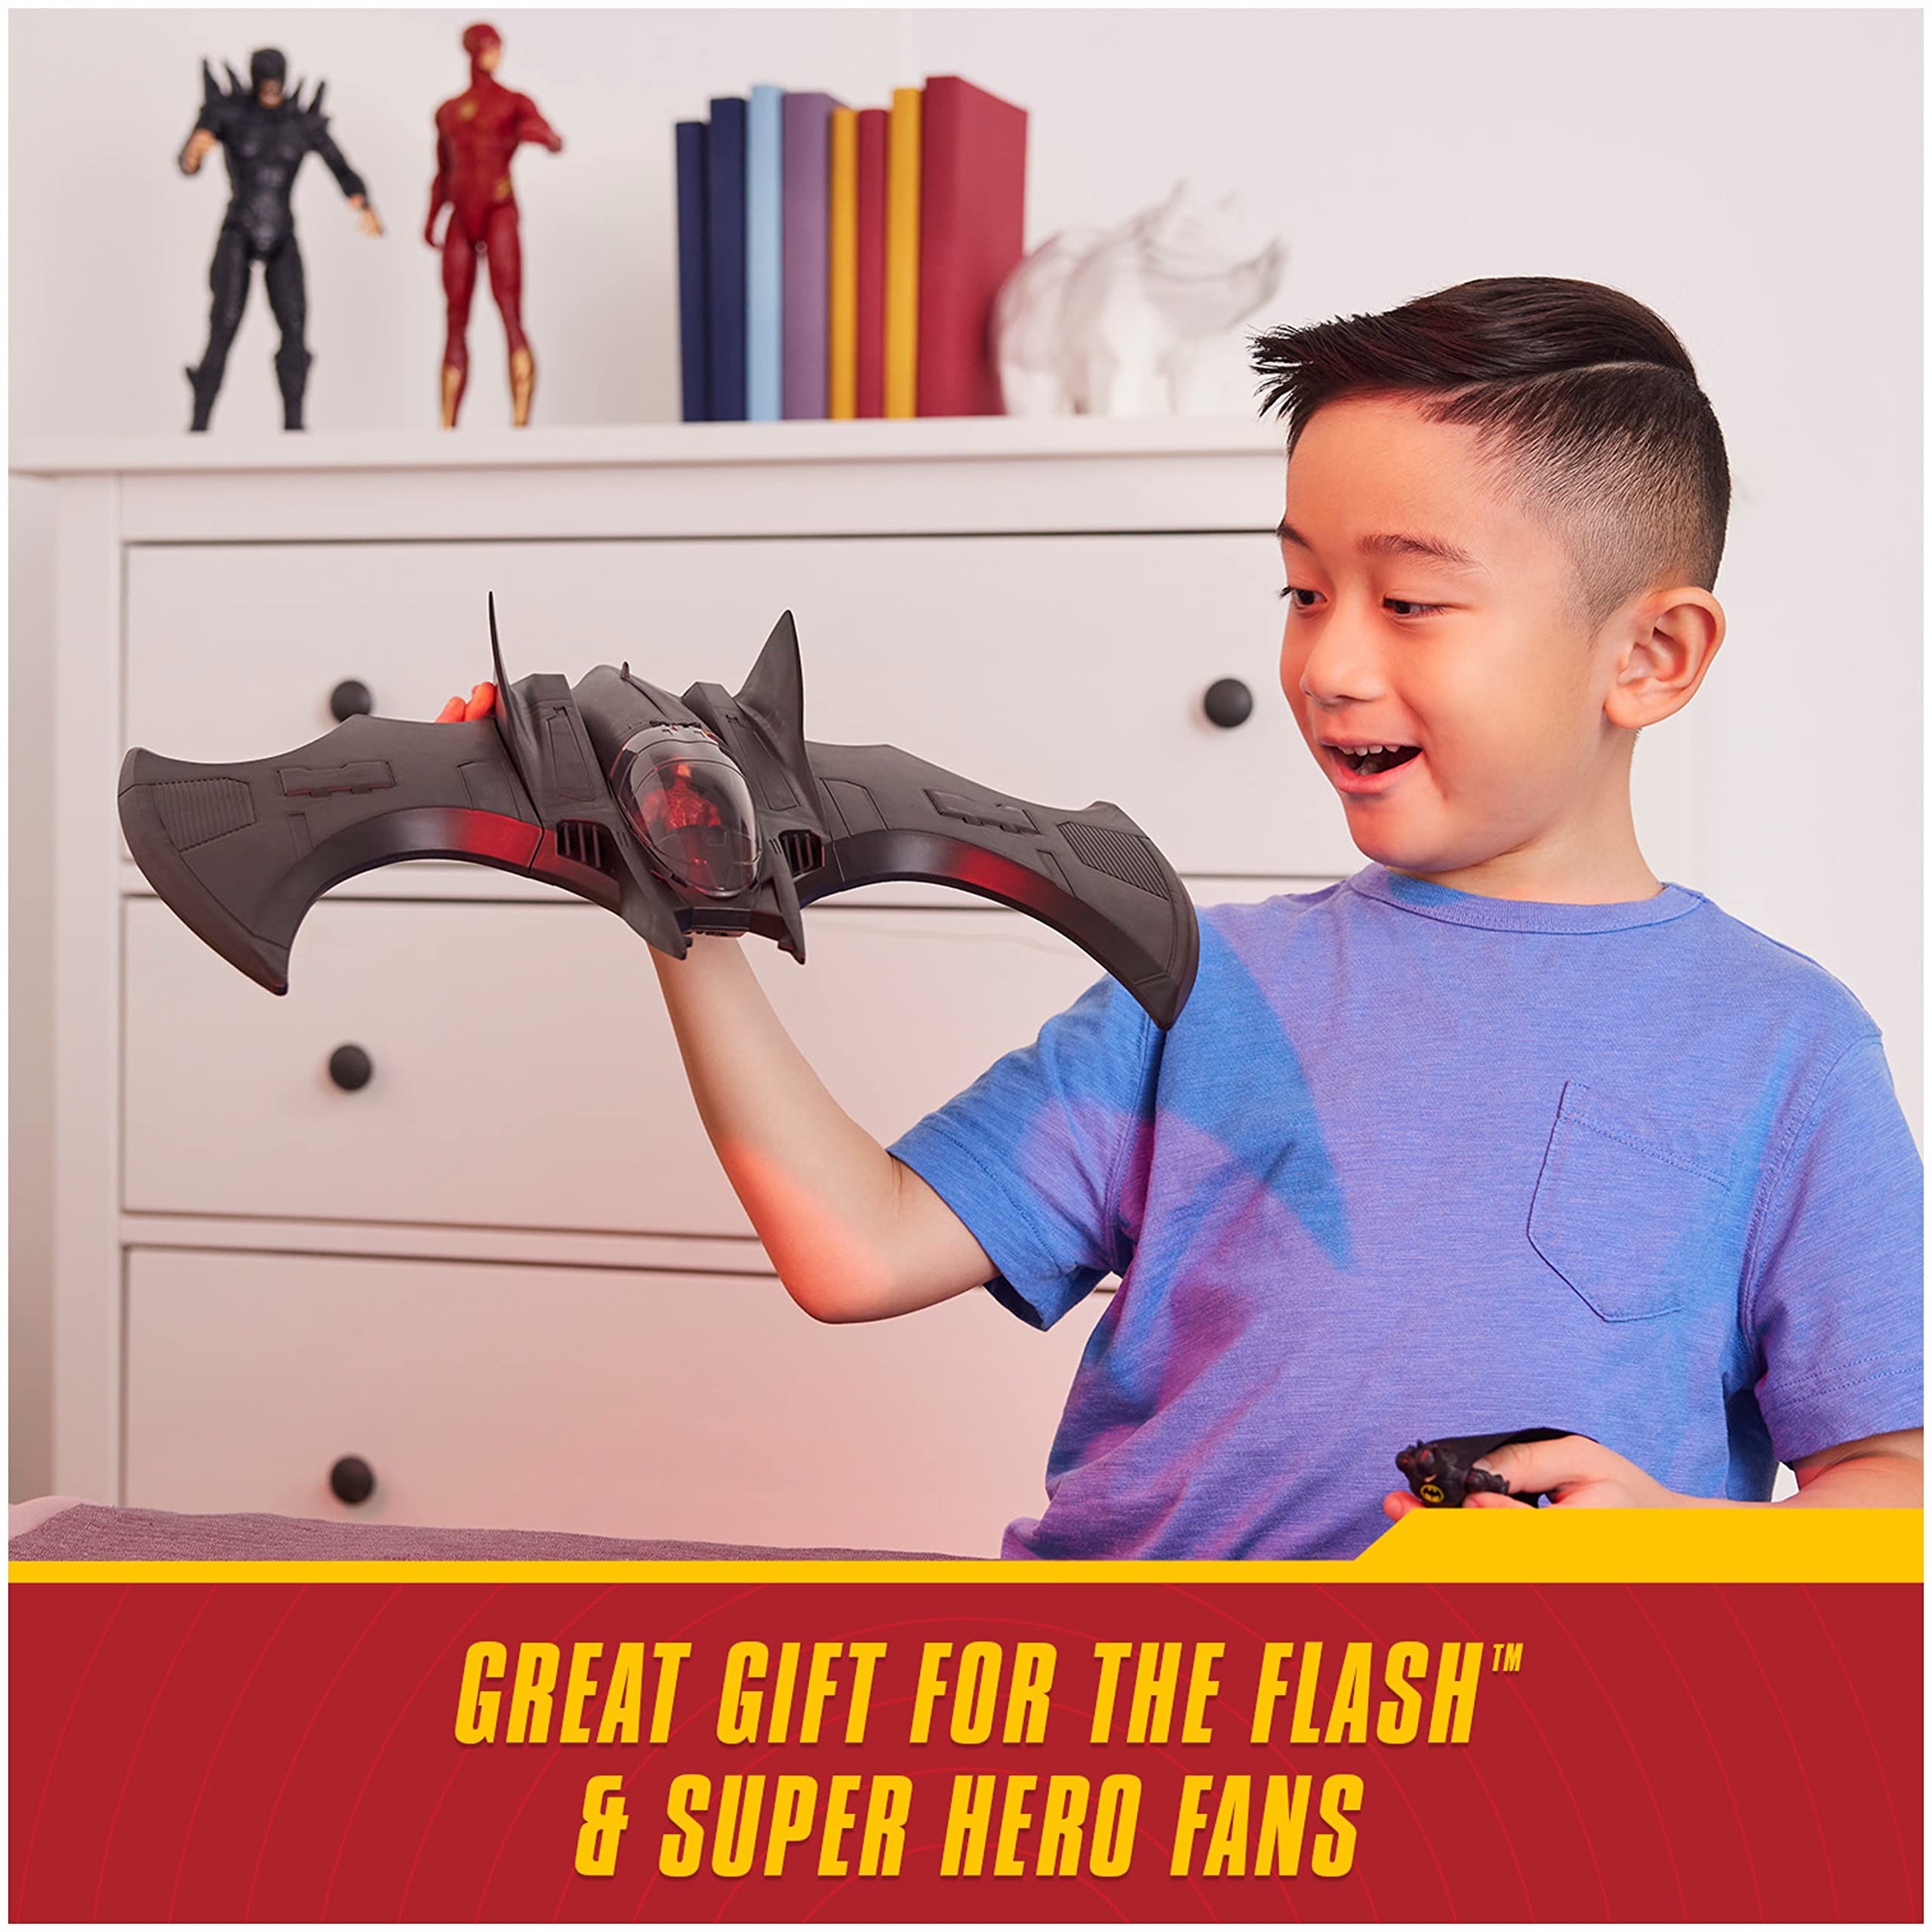 DC Comics, The Flash Ultimate Batwing Set The Flash and Batman Action Figures, 4-inch Playset Kids Toys for Boys and Girls 3 and Up